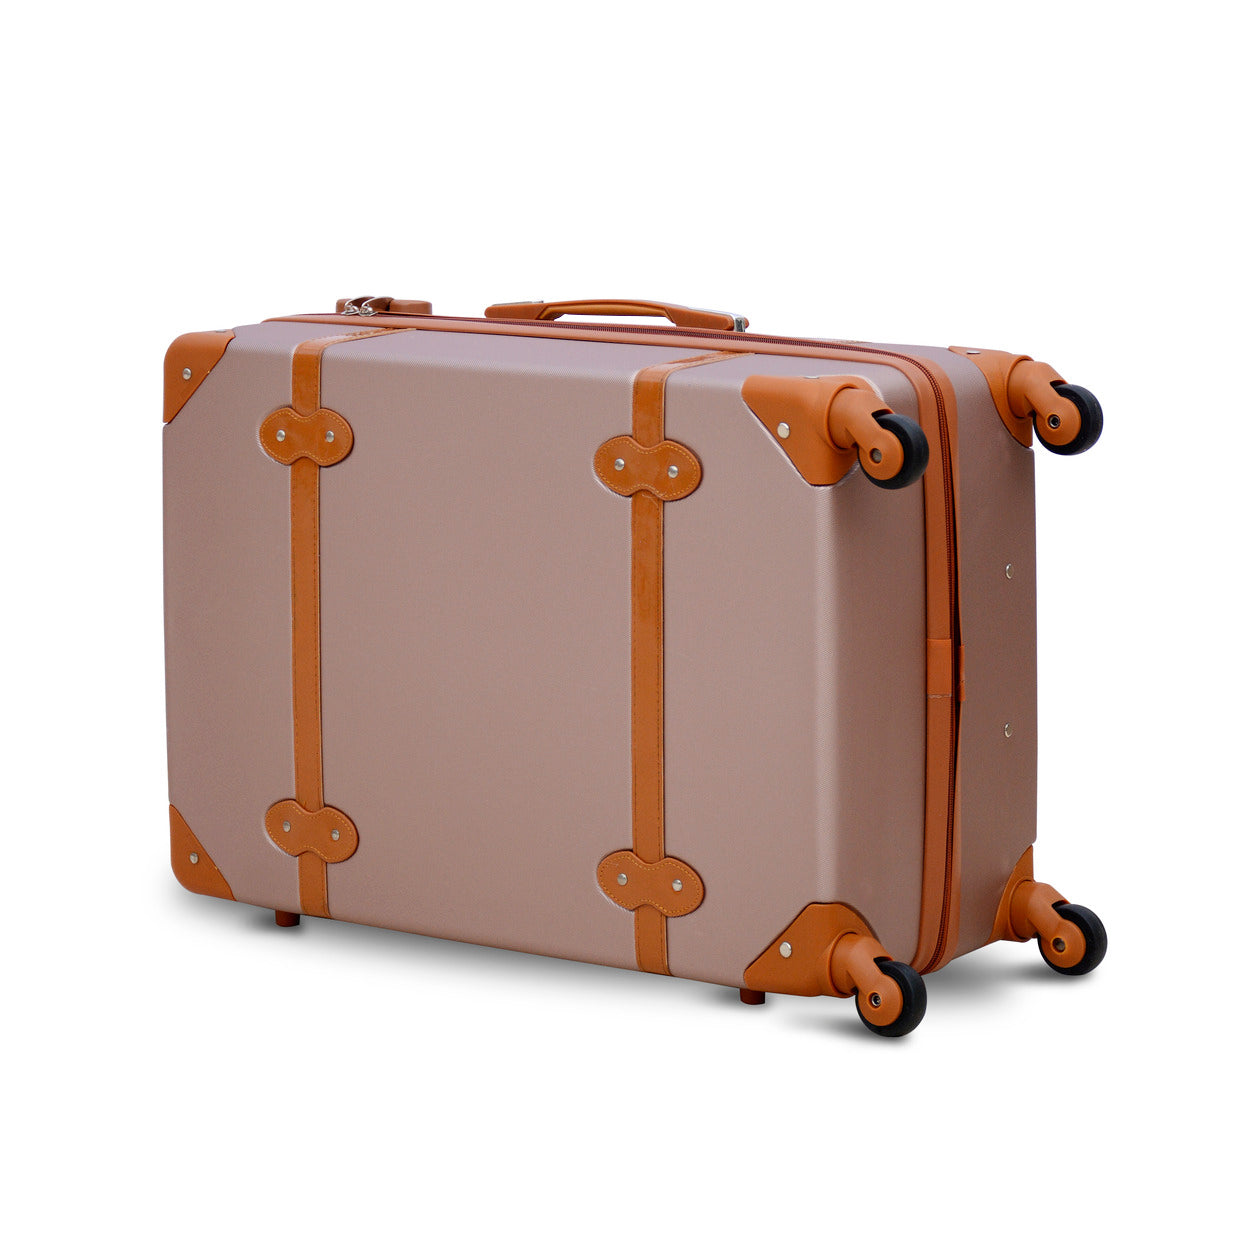 28" Lightweight ABS Corner Guard Luggage | Rose Gold Colour Hard Case Trolley Bag